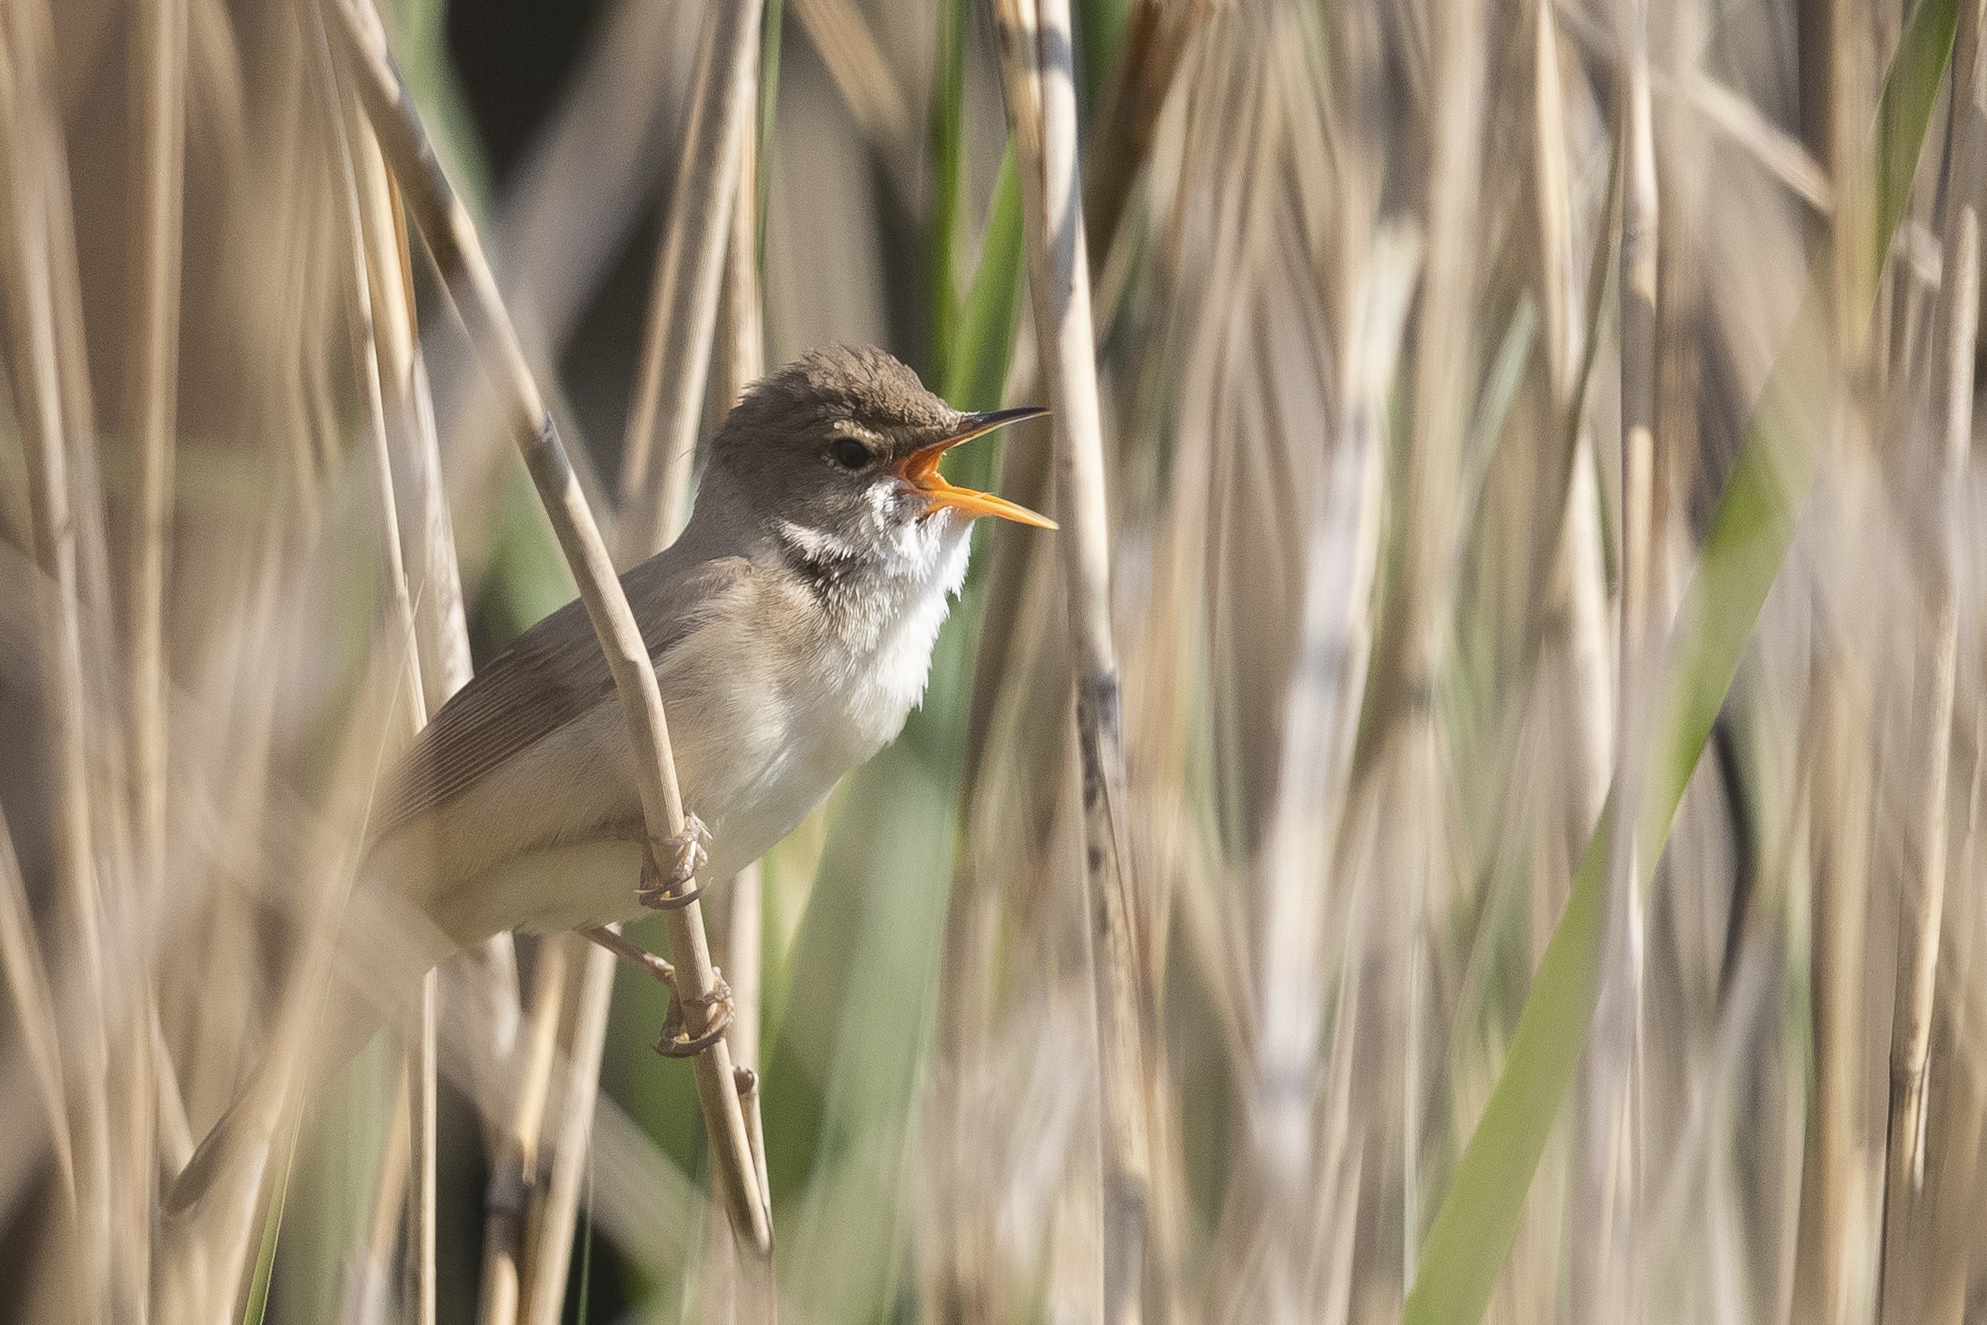 A reed warbler sings in reeds next to the Serpentine in Hyde Park on May 21, 2020 in London, United Kingdom. (Photo: Getty)